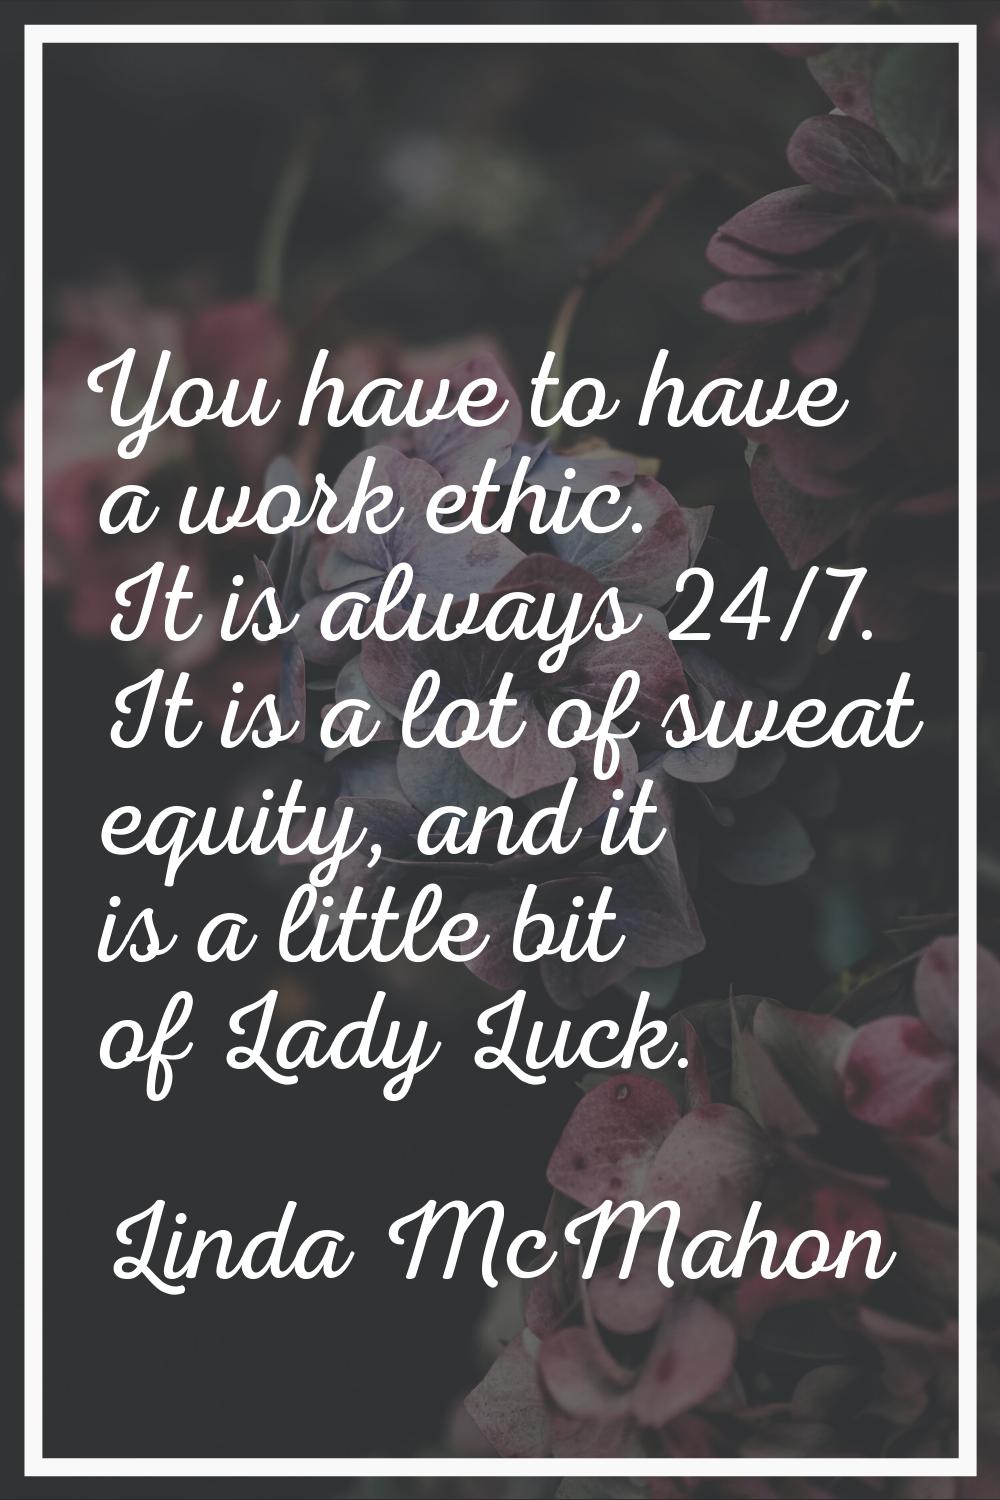 You have to have a work ethic. It is always 24/7. It is a lot of sweat equity, and it is a little b